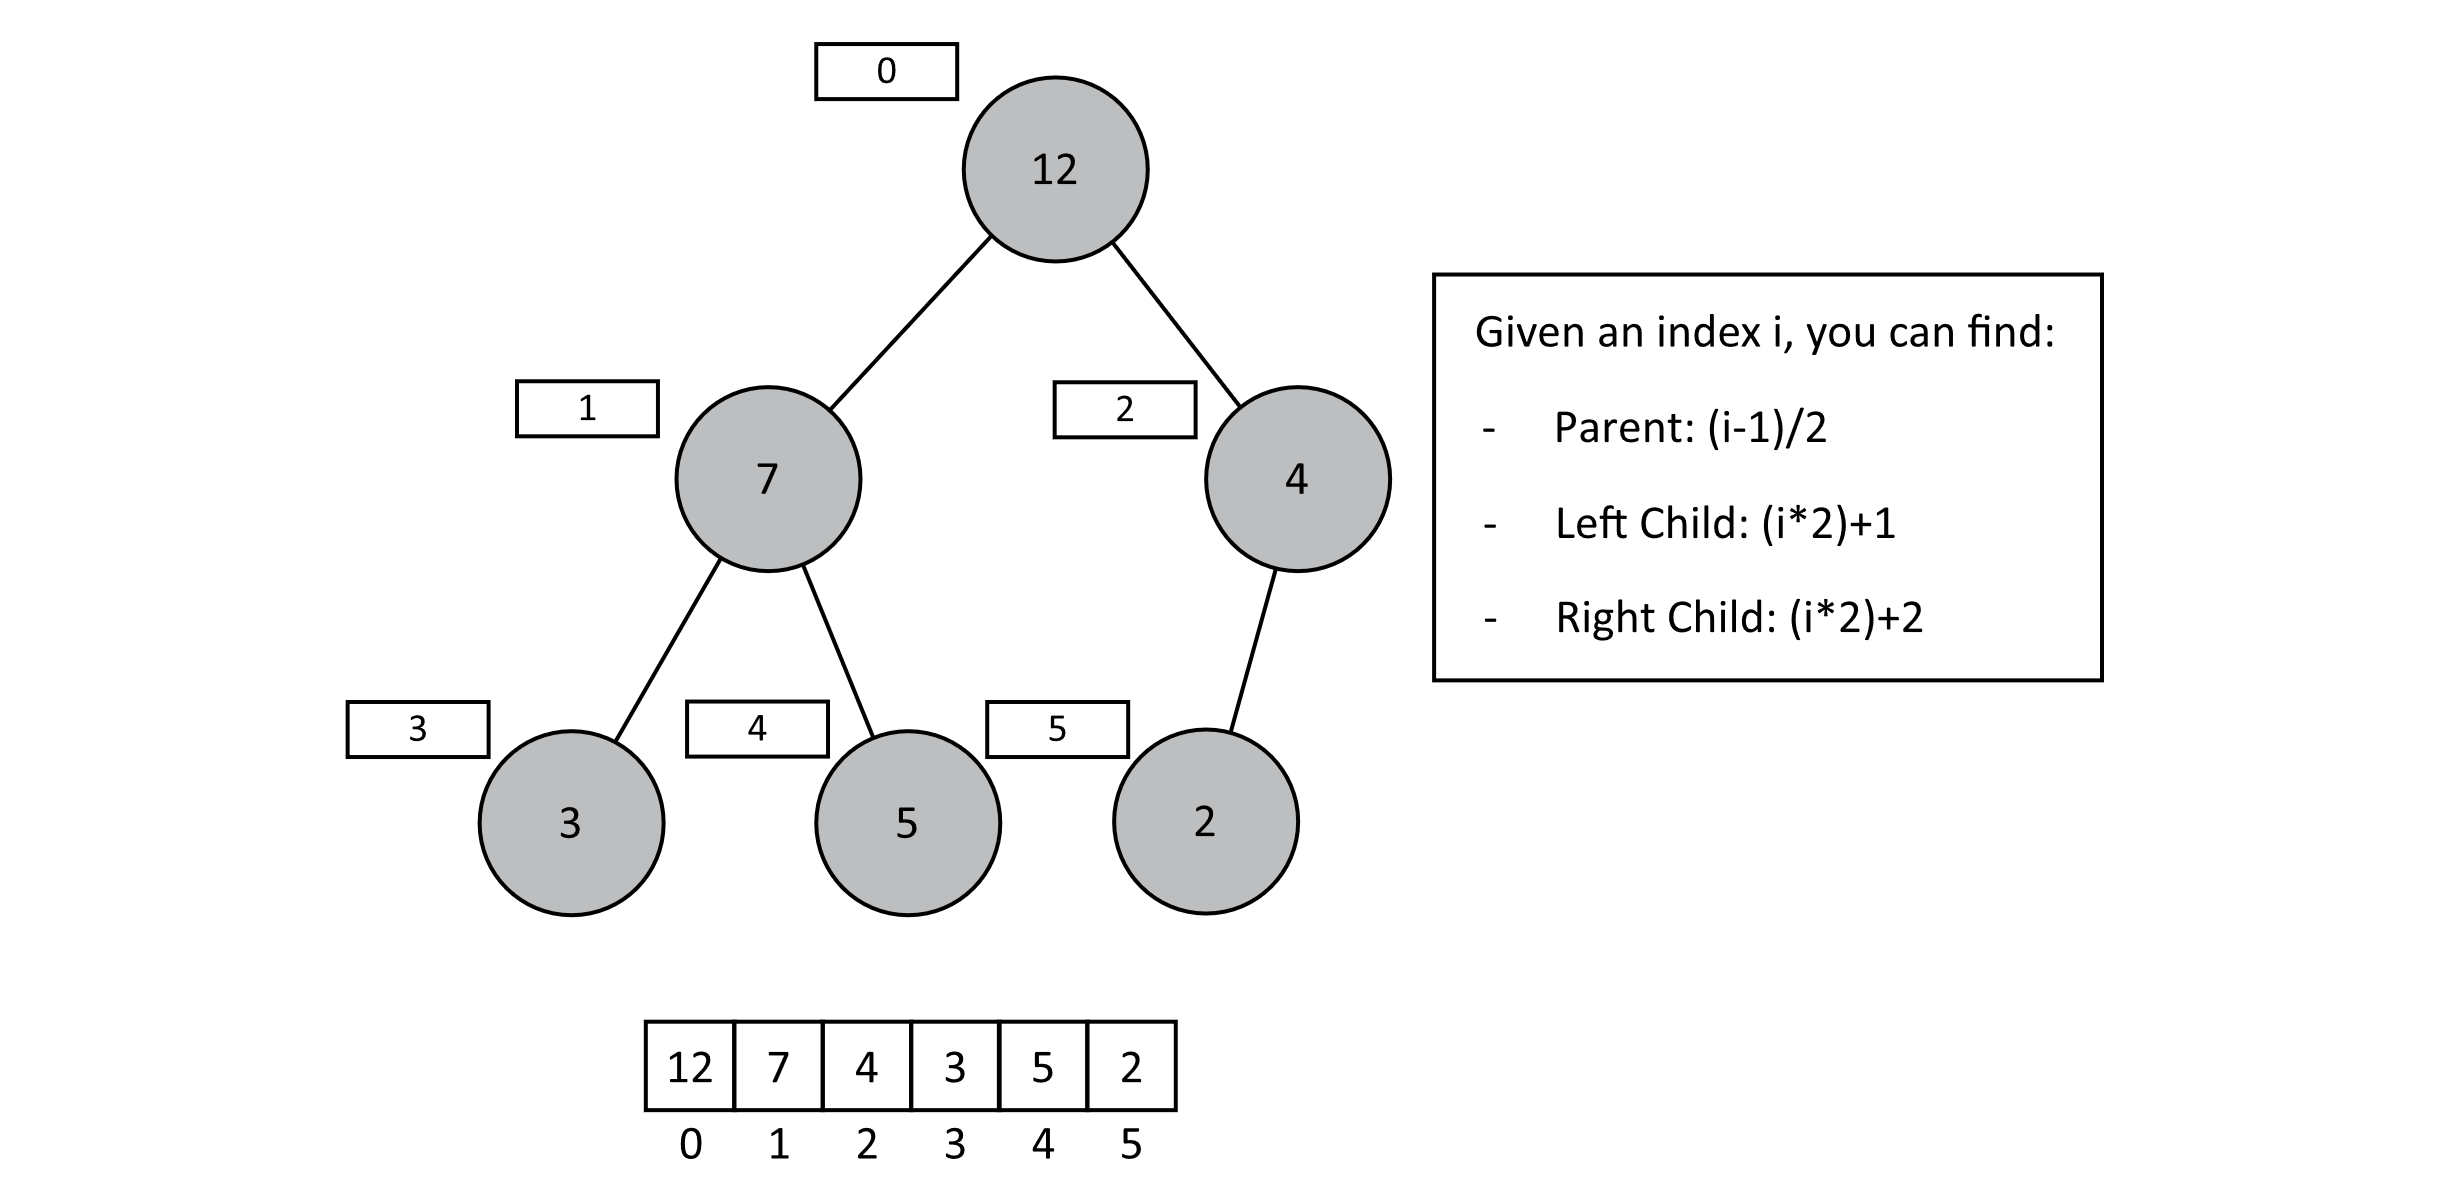 A binary heap encoded in an array. Each child is at a position 2*i + 1 or 2*i + 2 for any index of a parent.